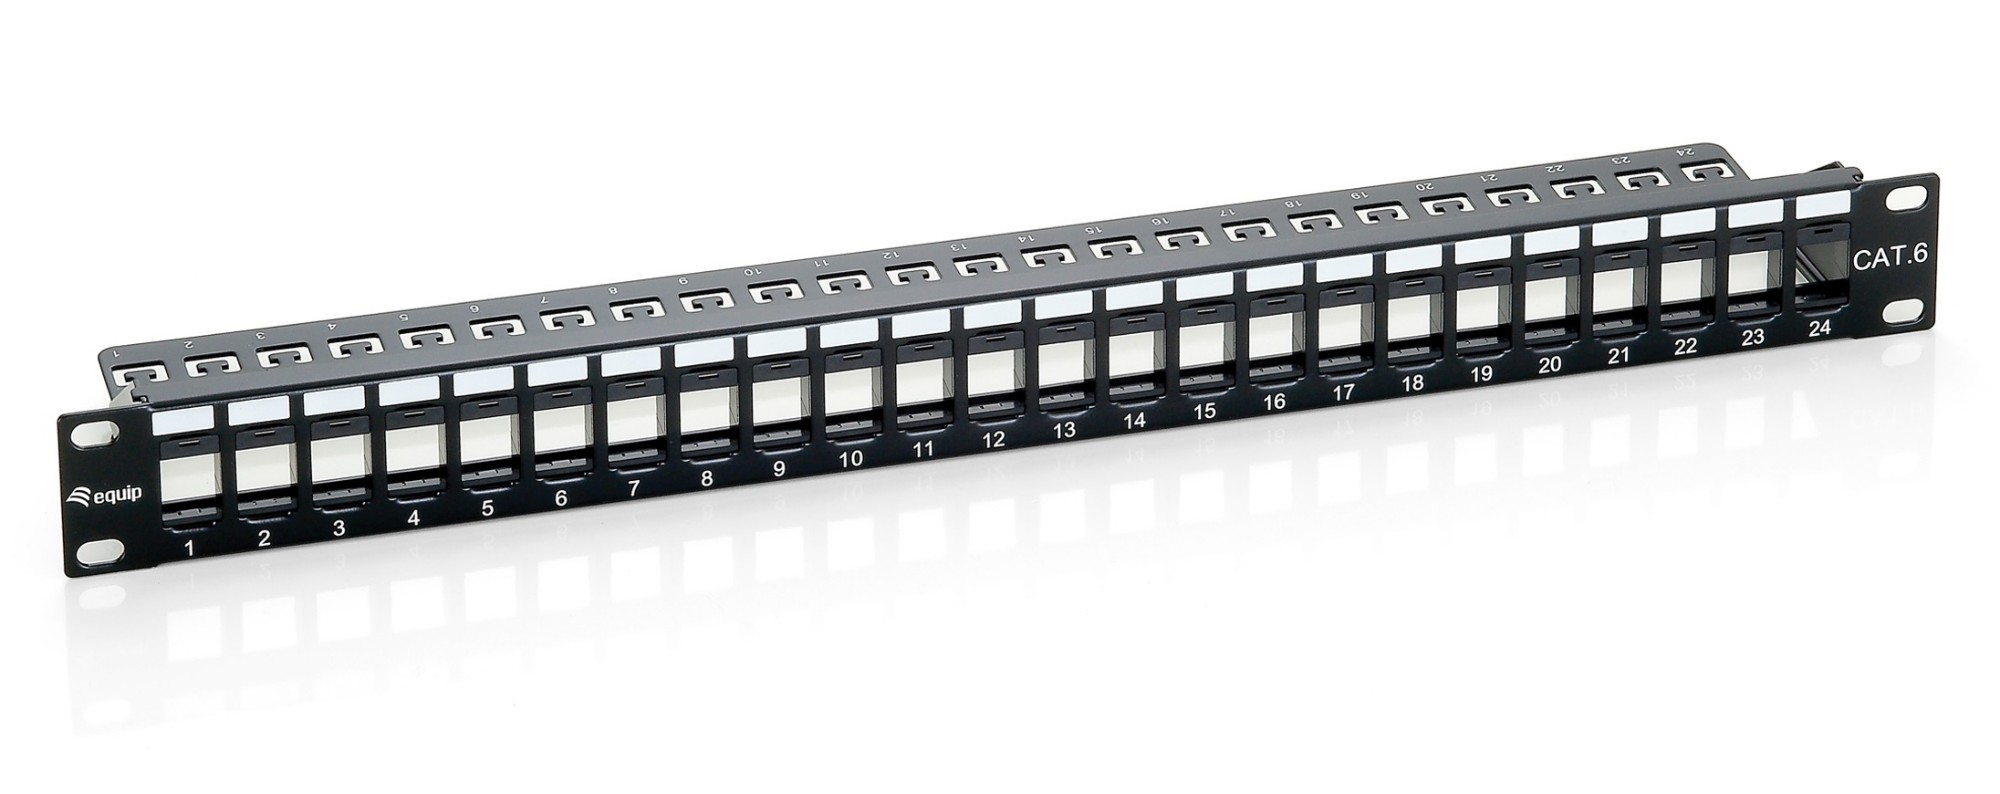 Photos - Other network equipment Equip 24-Port Keystone Cat.6 Unshielded Patch Panel, Black 769224 